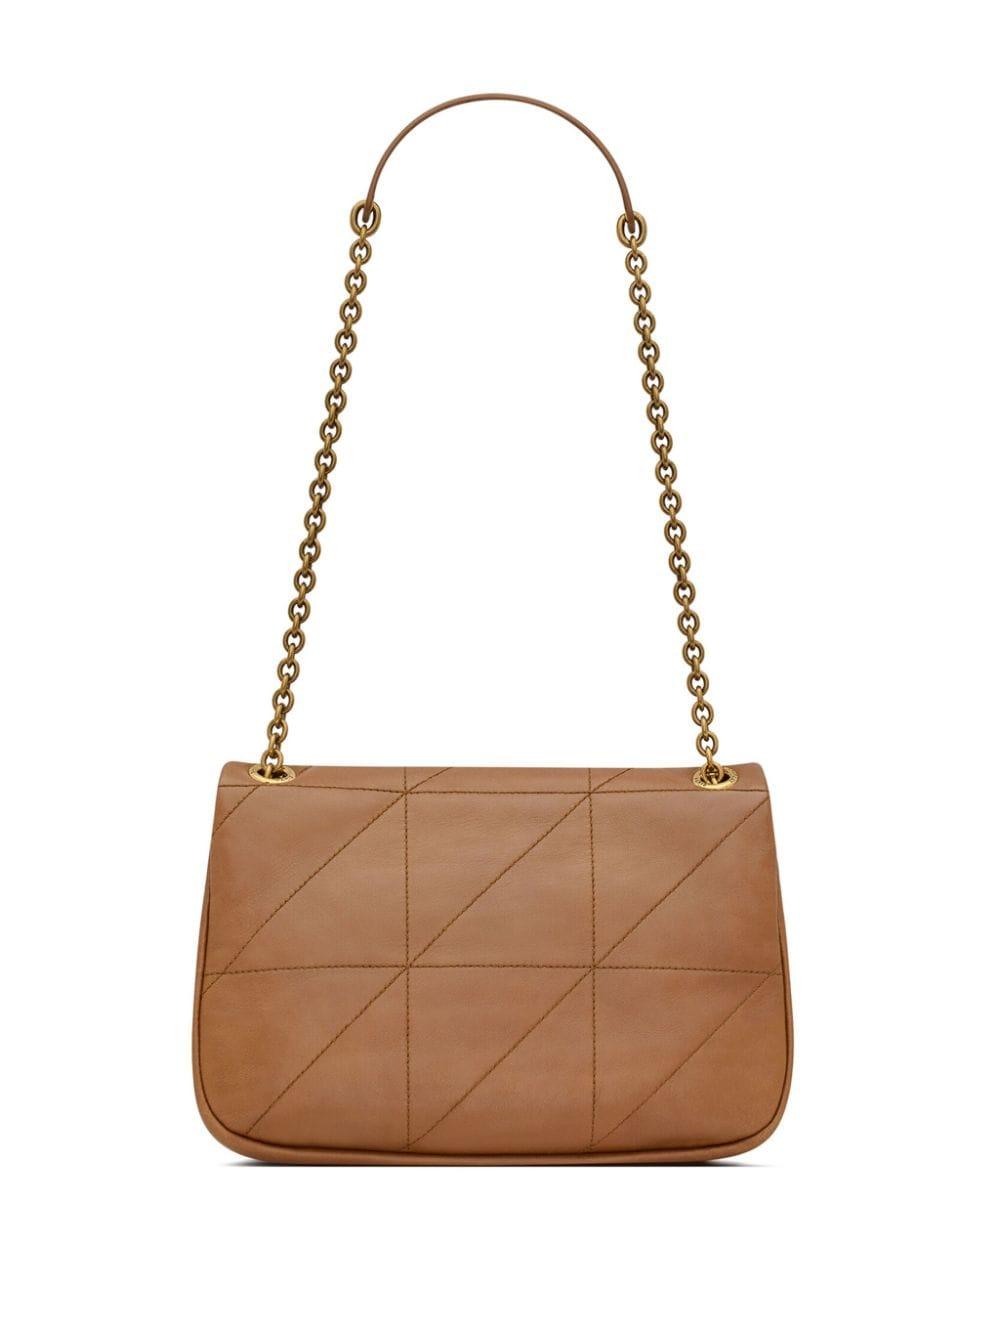 SAINT LAURENT Jamie 4.3 Small Quilted Lambskin Leather Handbag in Light Fox with Gold-Tone Accents